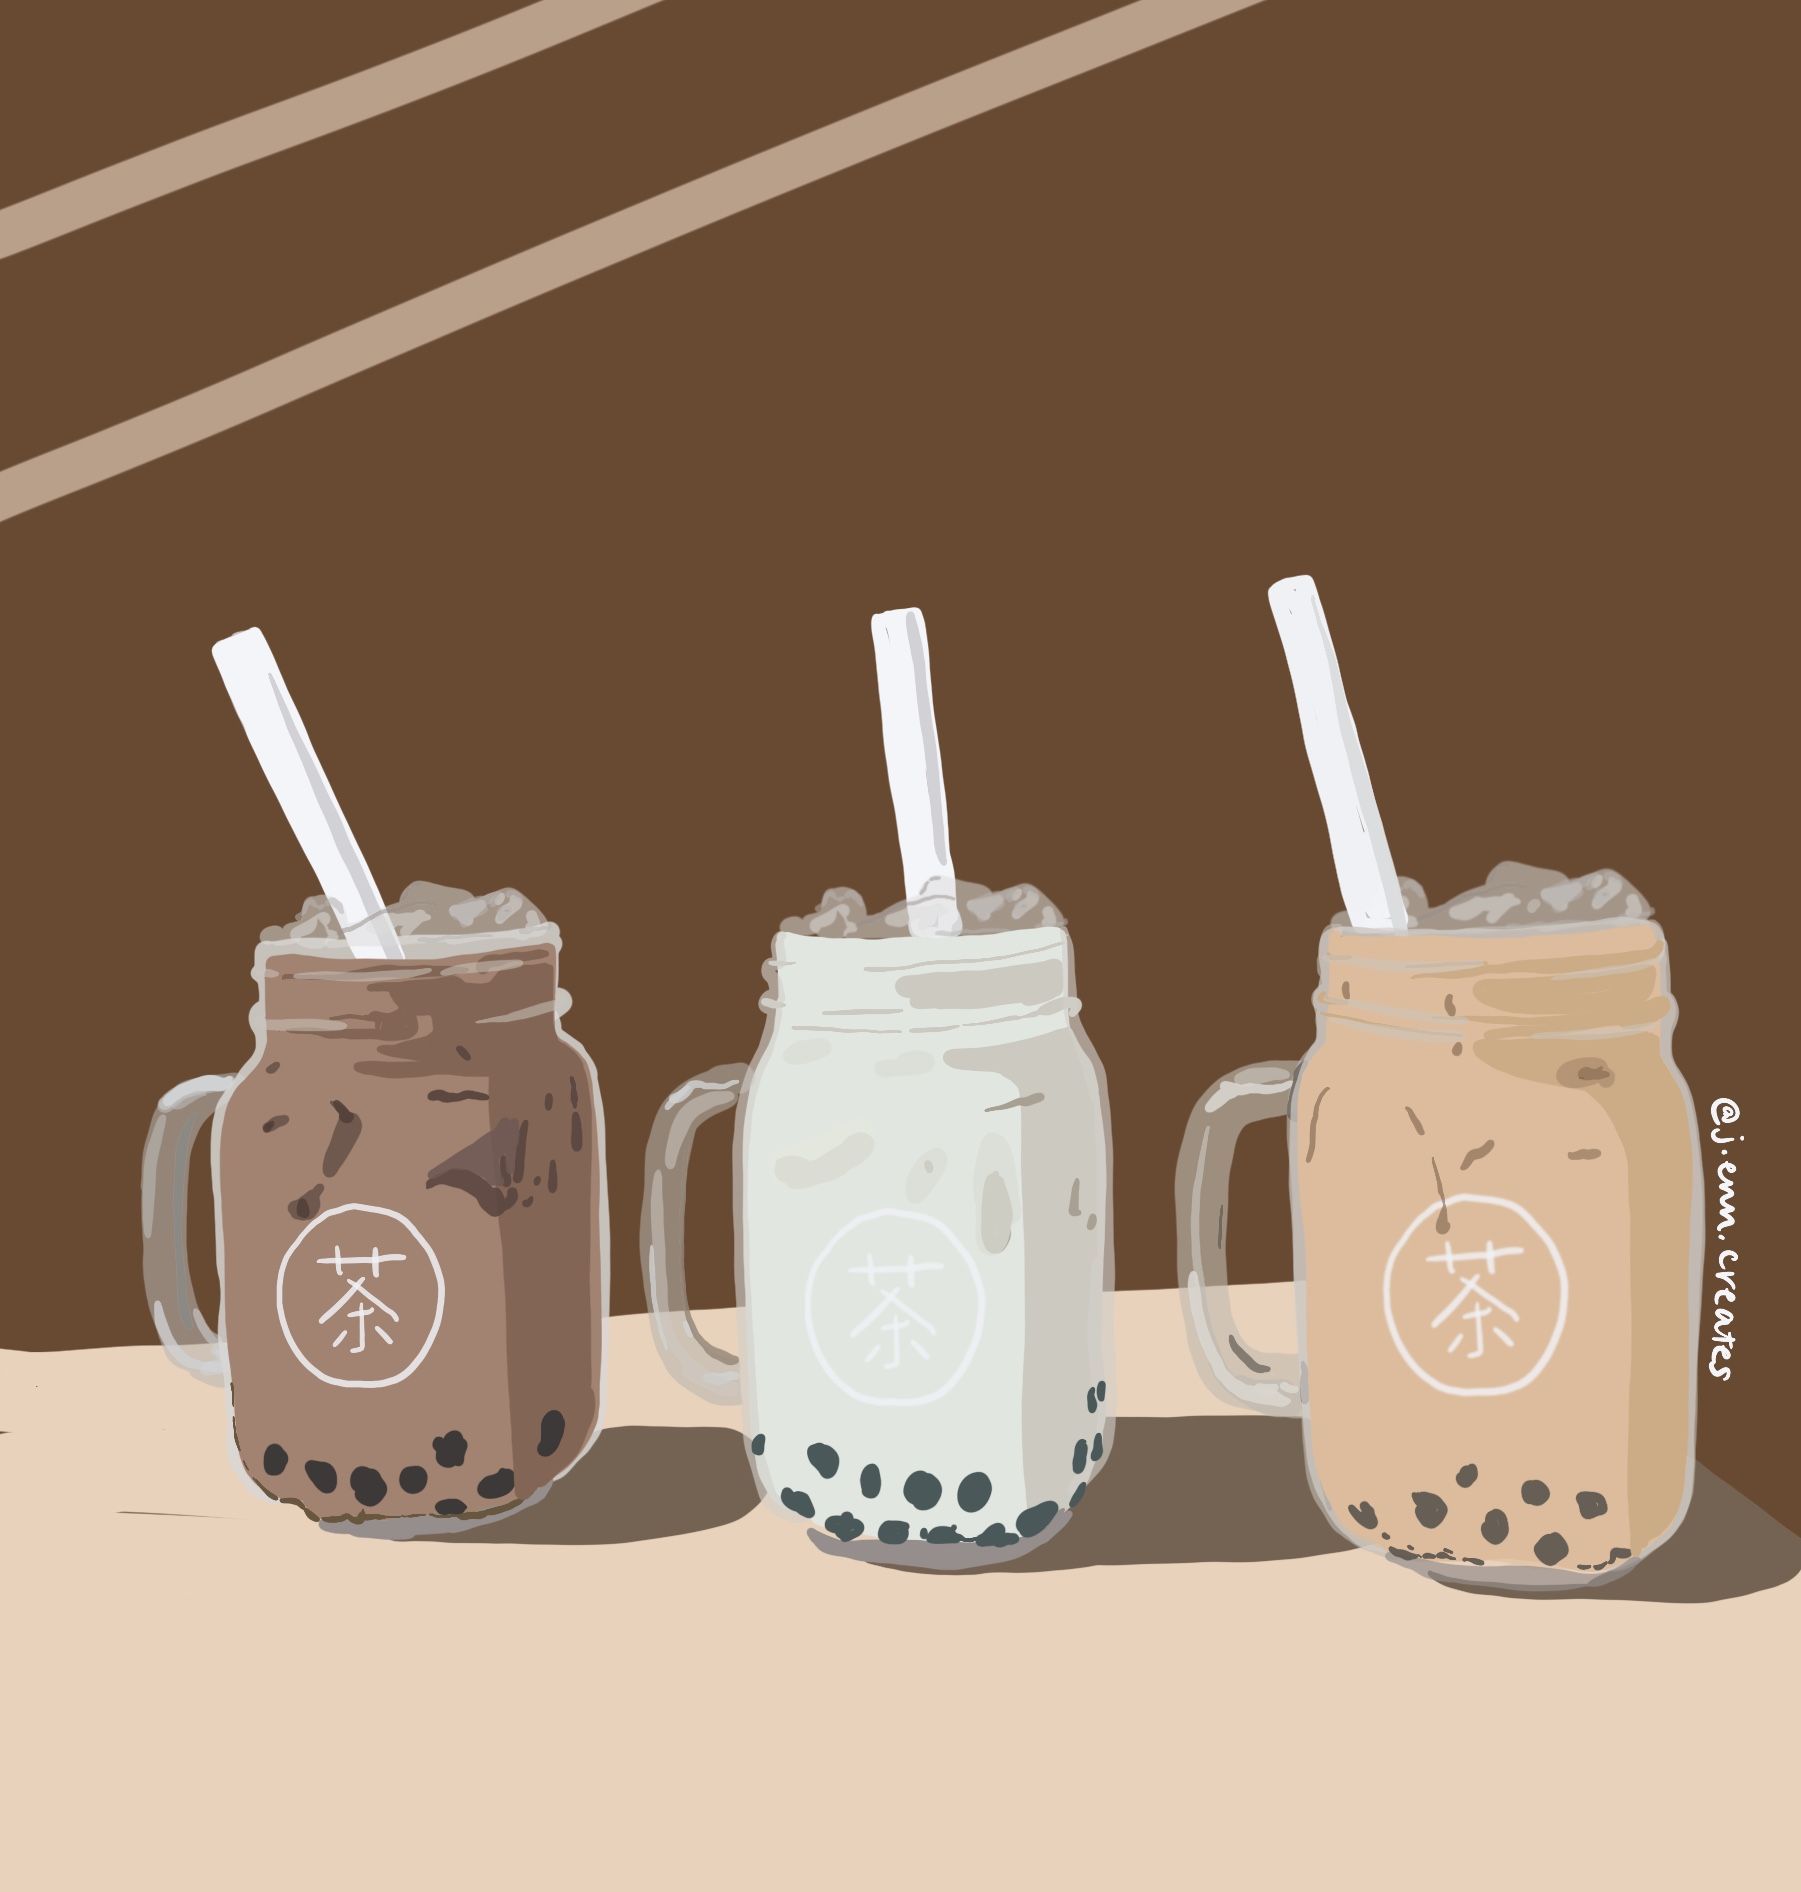 An illustration of three cups of bubble tea. - Boba